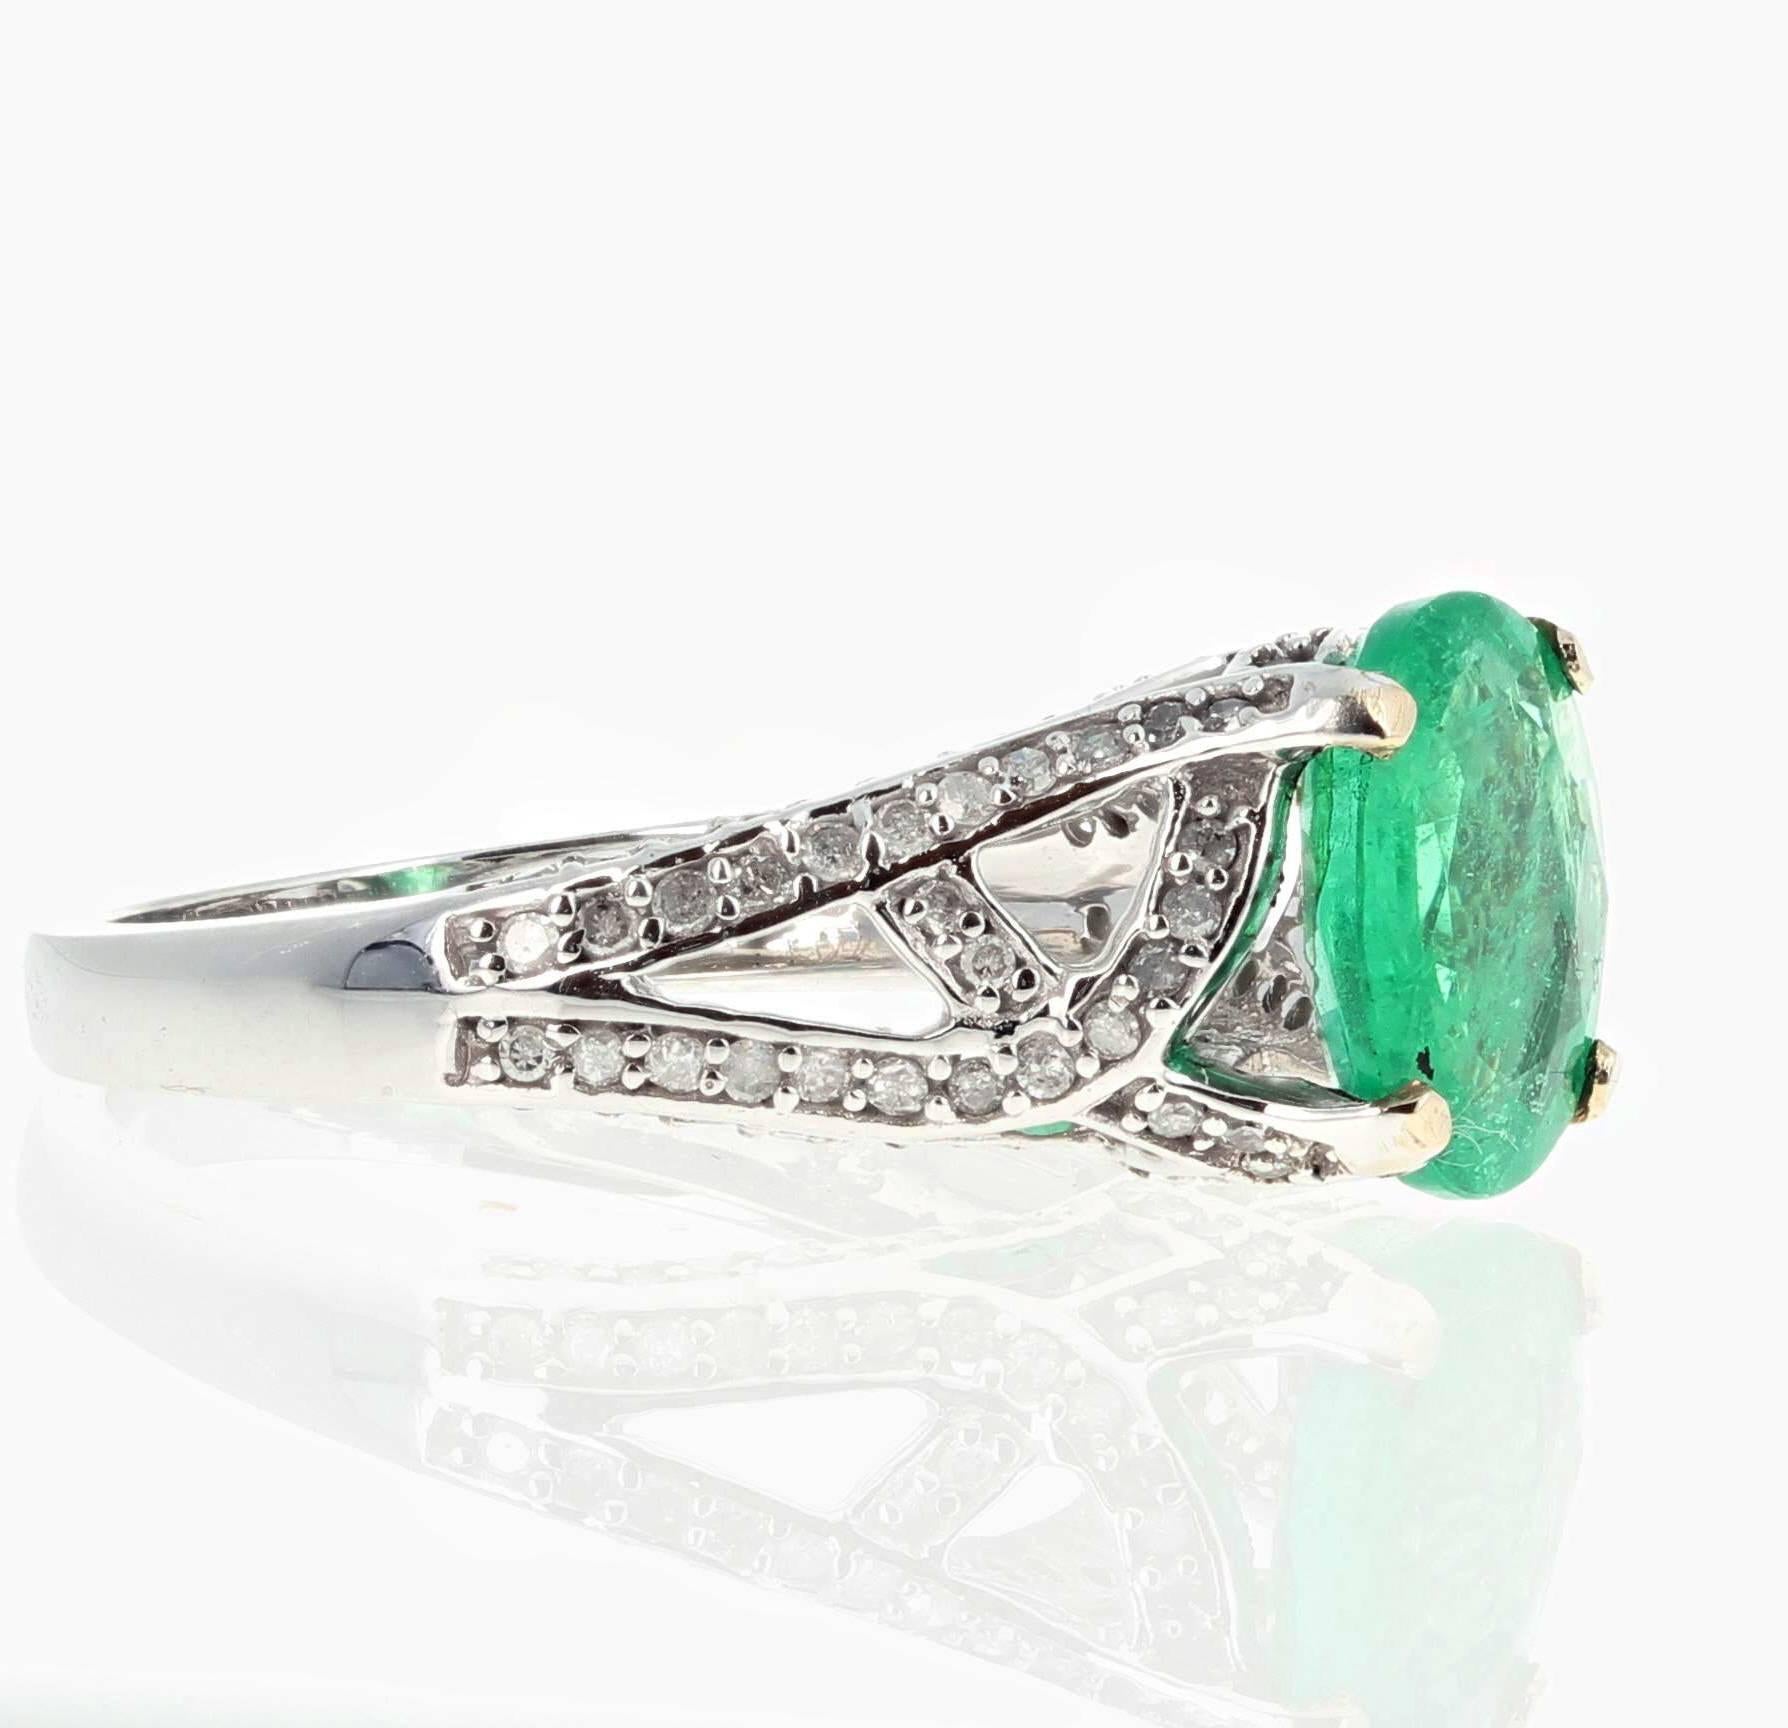 Bright beautiful 3 carat Colombian Emerald accented with 0.5 carats of white sparkly Diamonds set in a 10Kt white gold ring size 7 (sizable FOR FREE).  Note that the ring is designed to hold the Emerald slightly at an angle.   